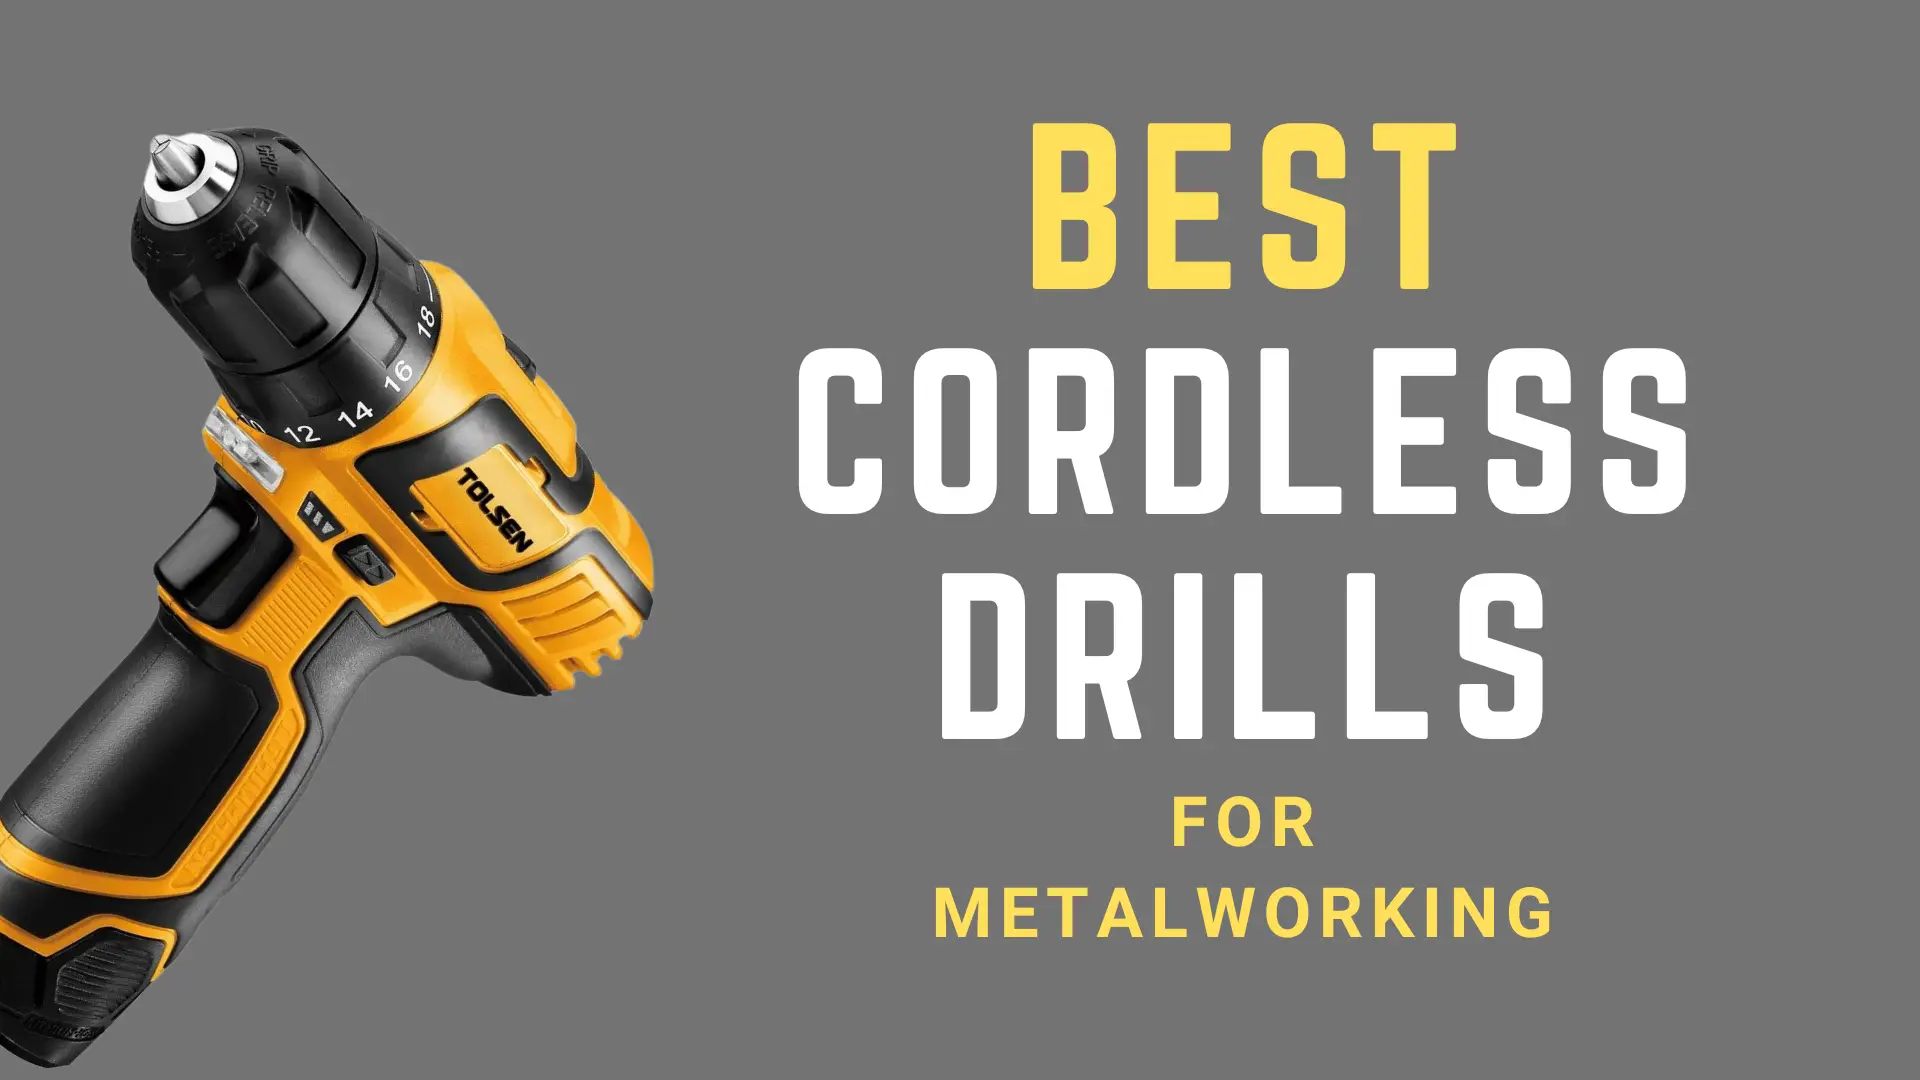 best cordless drills for metalworking